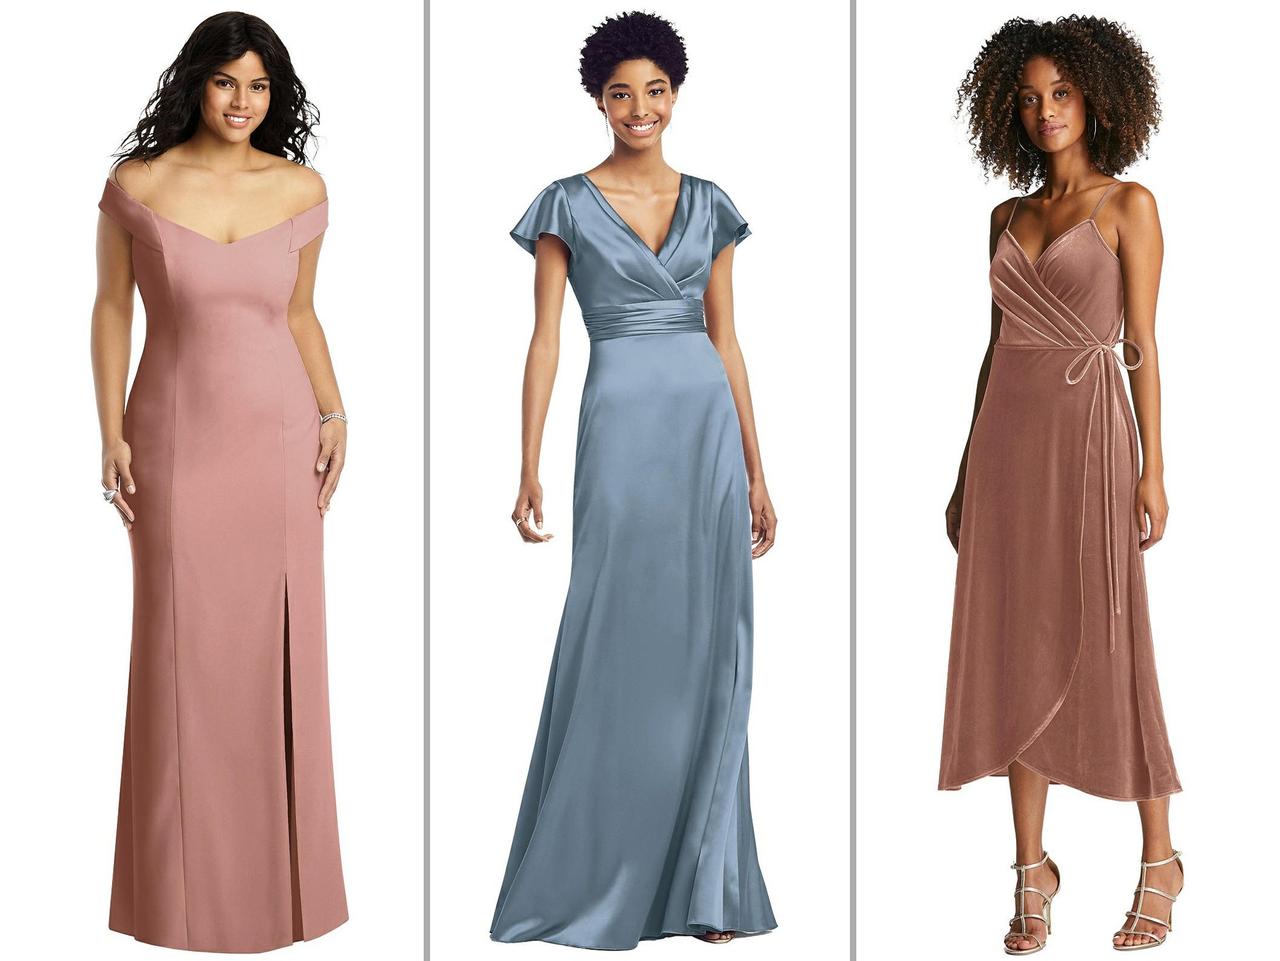 Where To Buy Bridesmaid Dresses Online ...